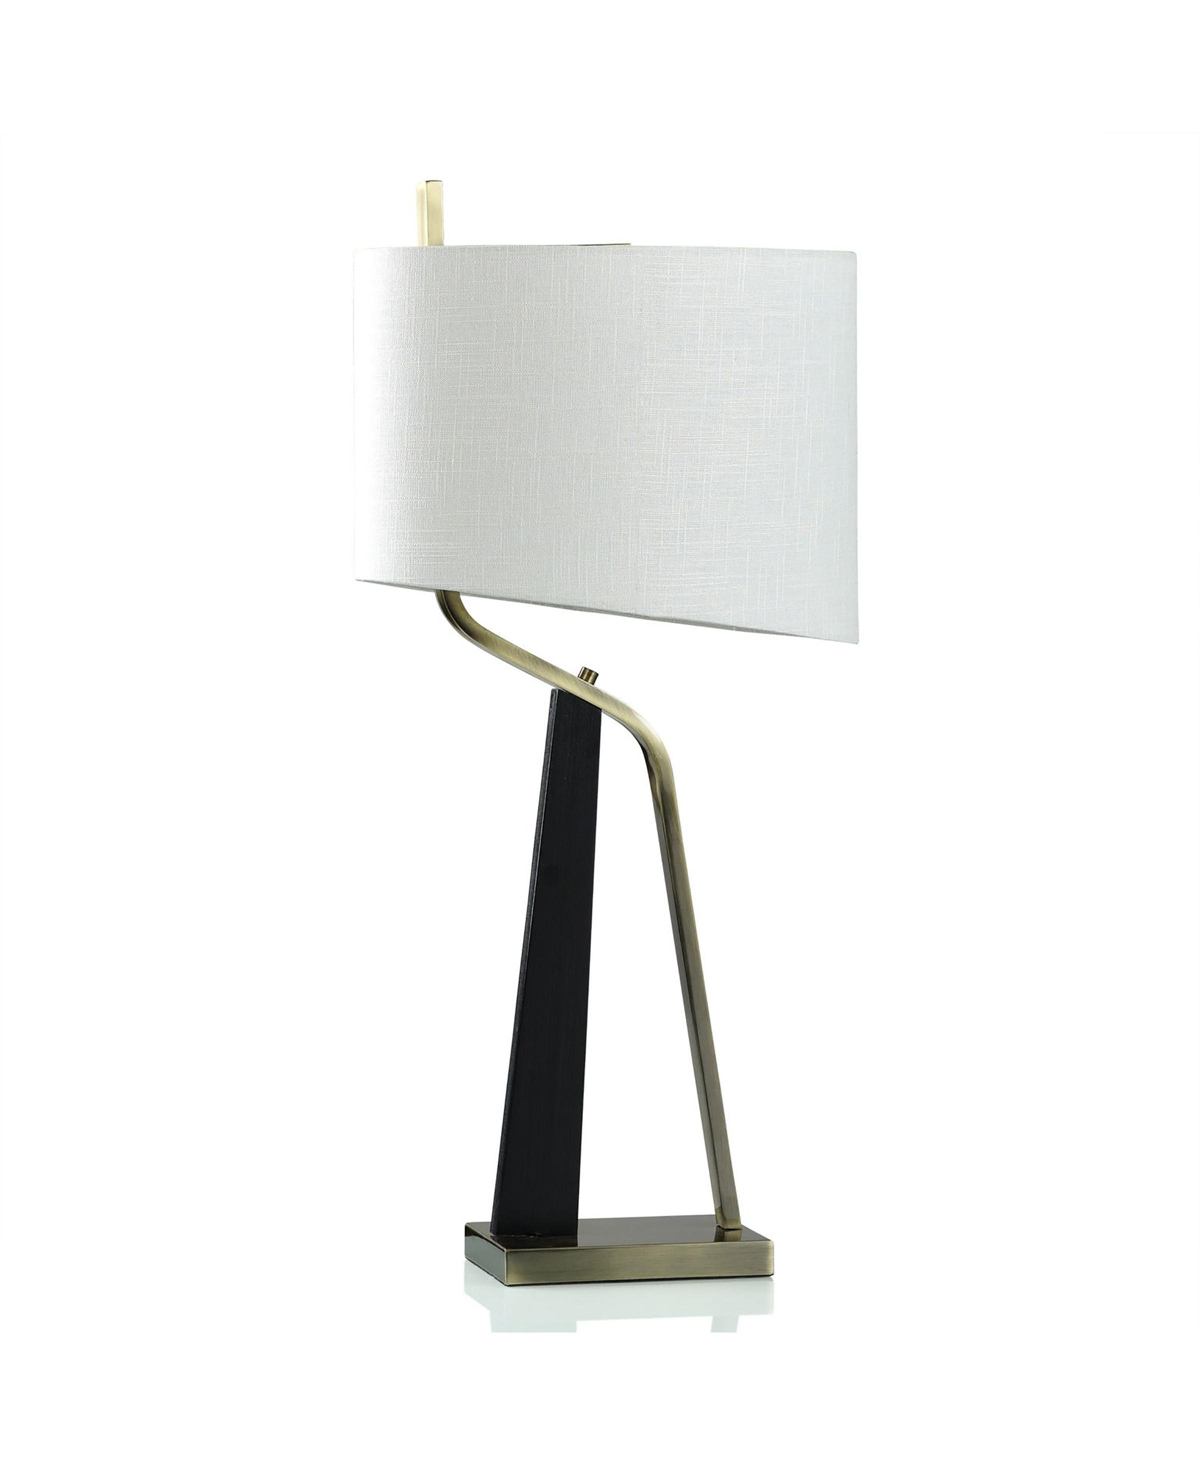 Stylecraft Home Collection 31" Domino Abstract Mid Century Modern Slanted Design Table Lamp In Matte Black,antique Brass